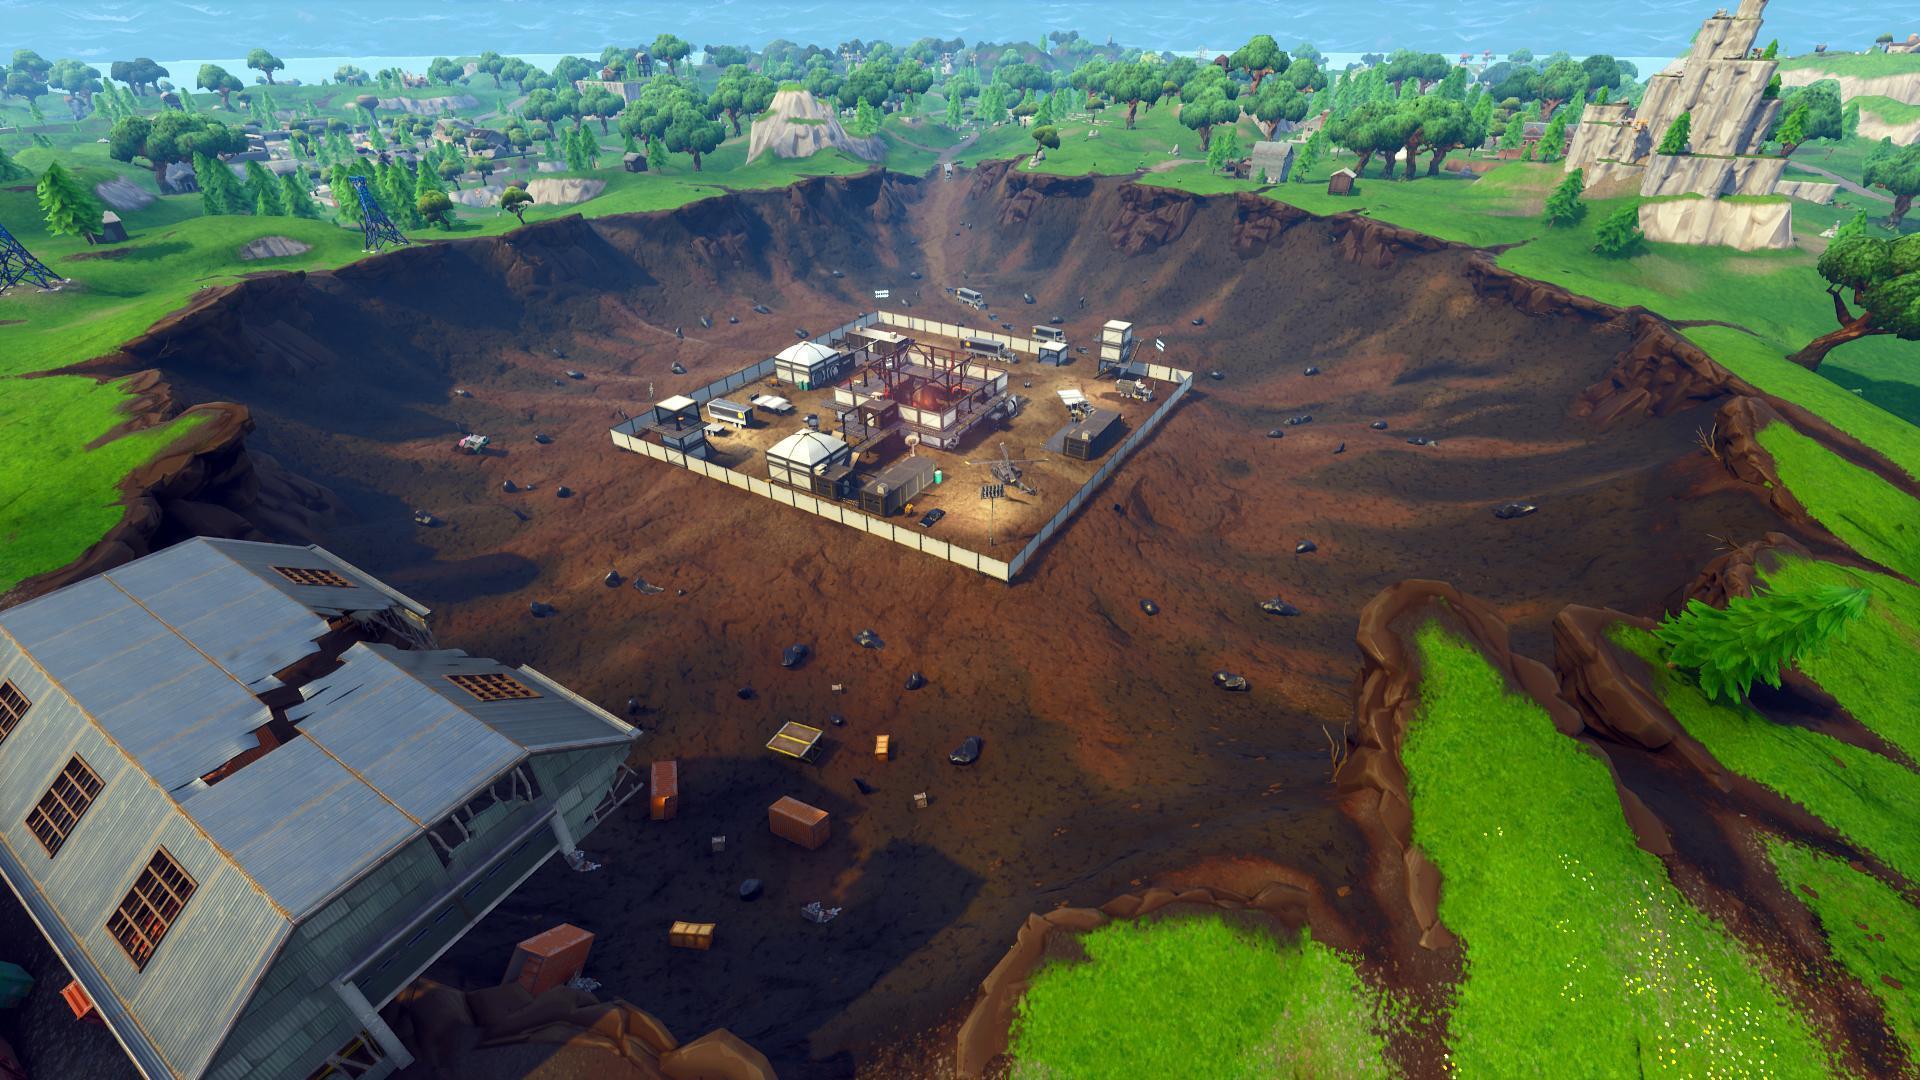 Fortnite: Battle Royale' - Where To Search For Chests In Dusty Divot